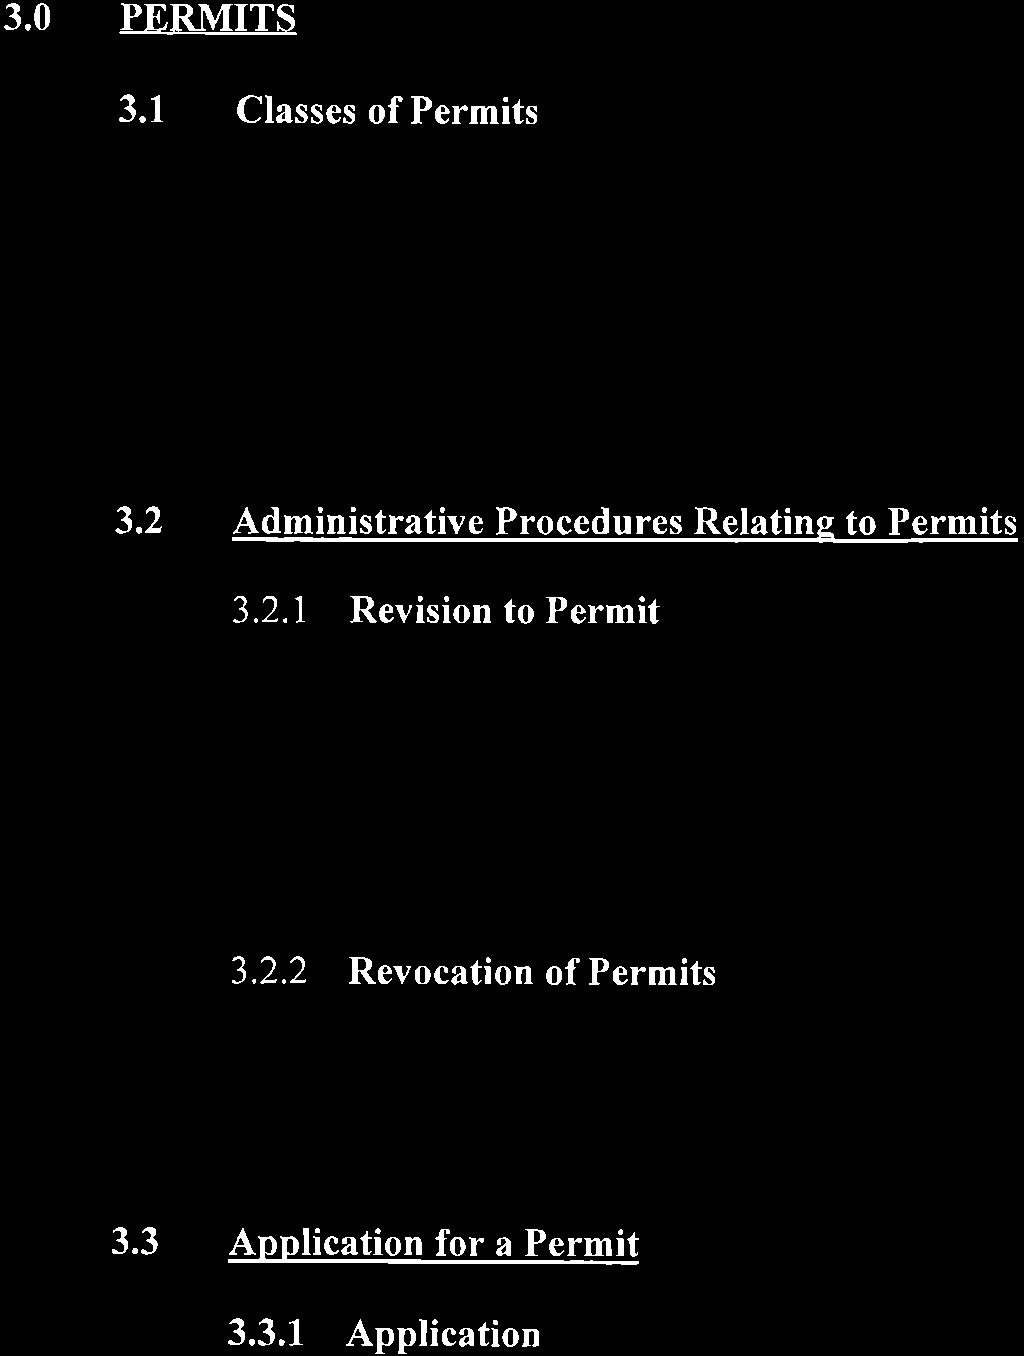 3.0 PERMITS 3.1 Classes of Permits 3.1.1 Classes of permits with respect to the construction, demolition and change of use of buildings in Schedule "A" and permit fees shall be as set out in Schedule "B" to this by-law.